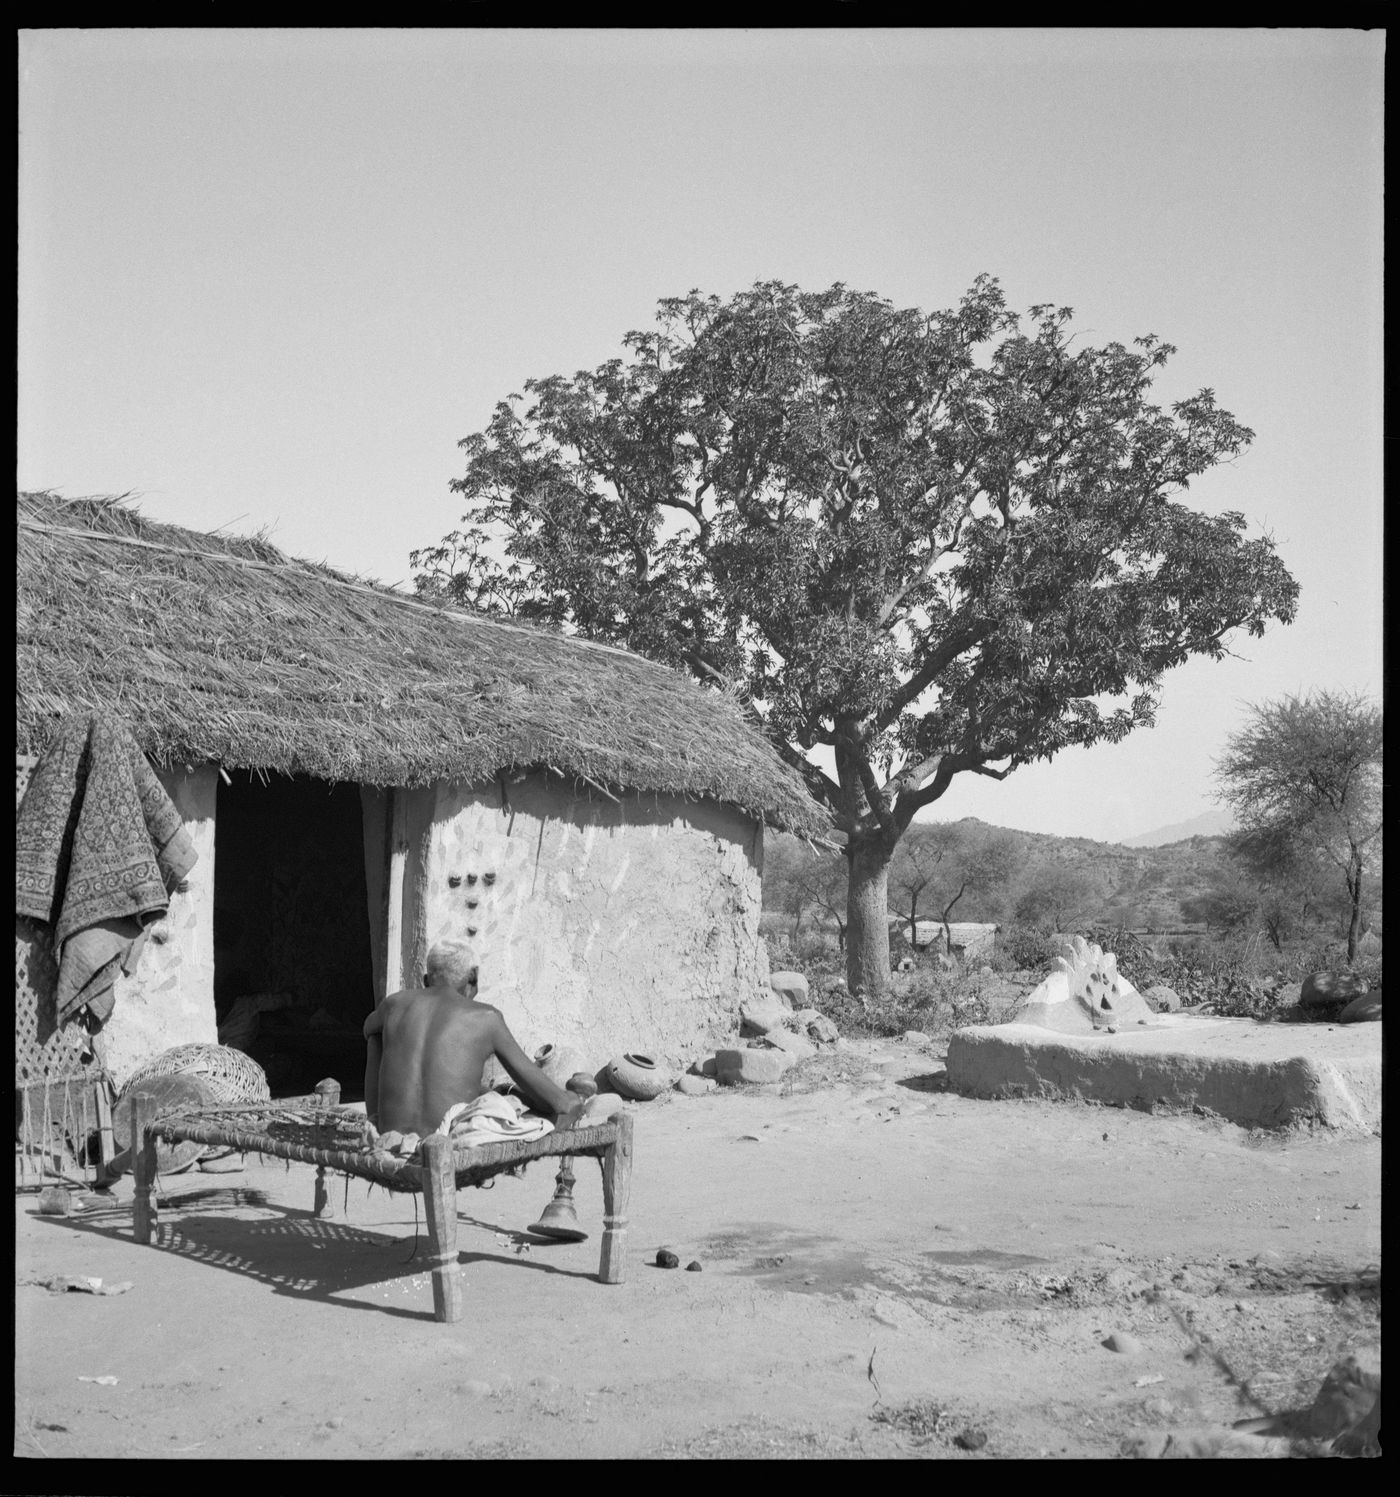 Rural house in Chandigarh's area, India